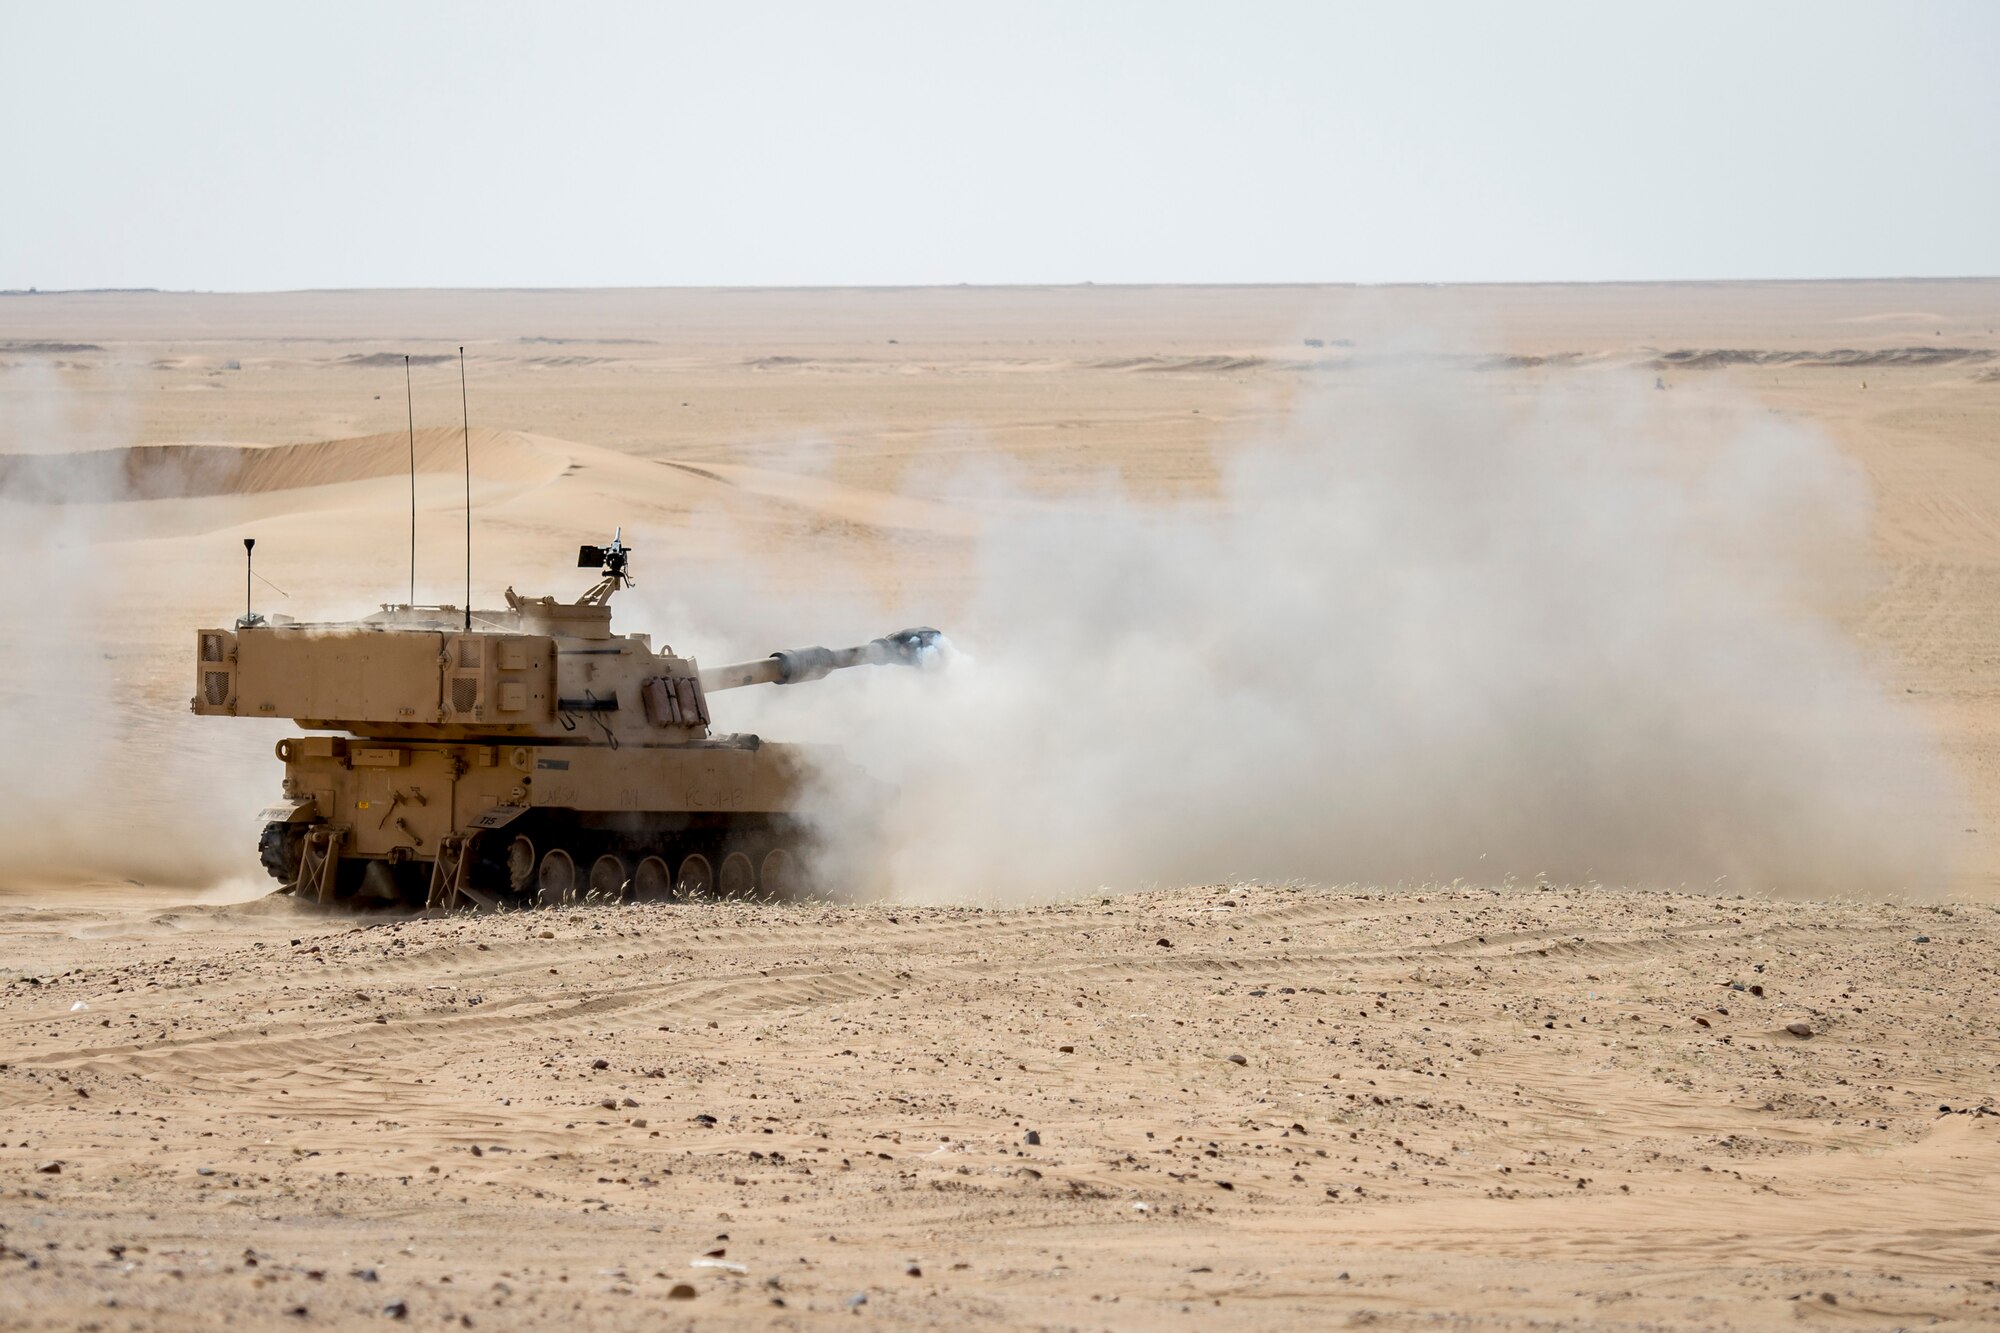 A U.S. Army M109A6 Paladin fires a 155mm artillery round during a Joint Operations live fire exercise on May 7, 2014 at an undisclosed location in Southwest Asia. The operation consisted of Army, Air Force, and Navy personnel working together to conduct a coordinated strike against a single target. (U.S. Air Force photo by Staff Sgt. Jeremy Bowcock)